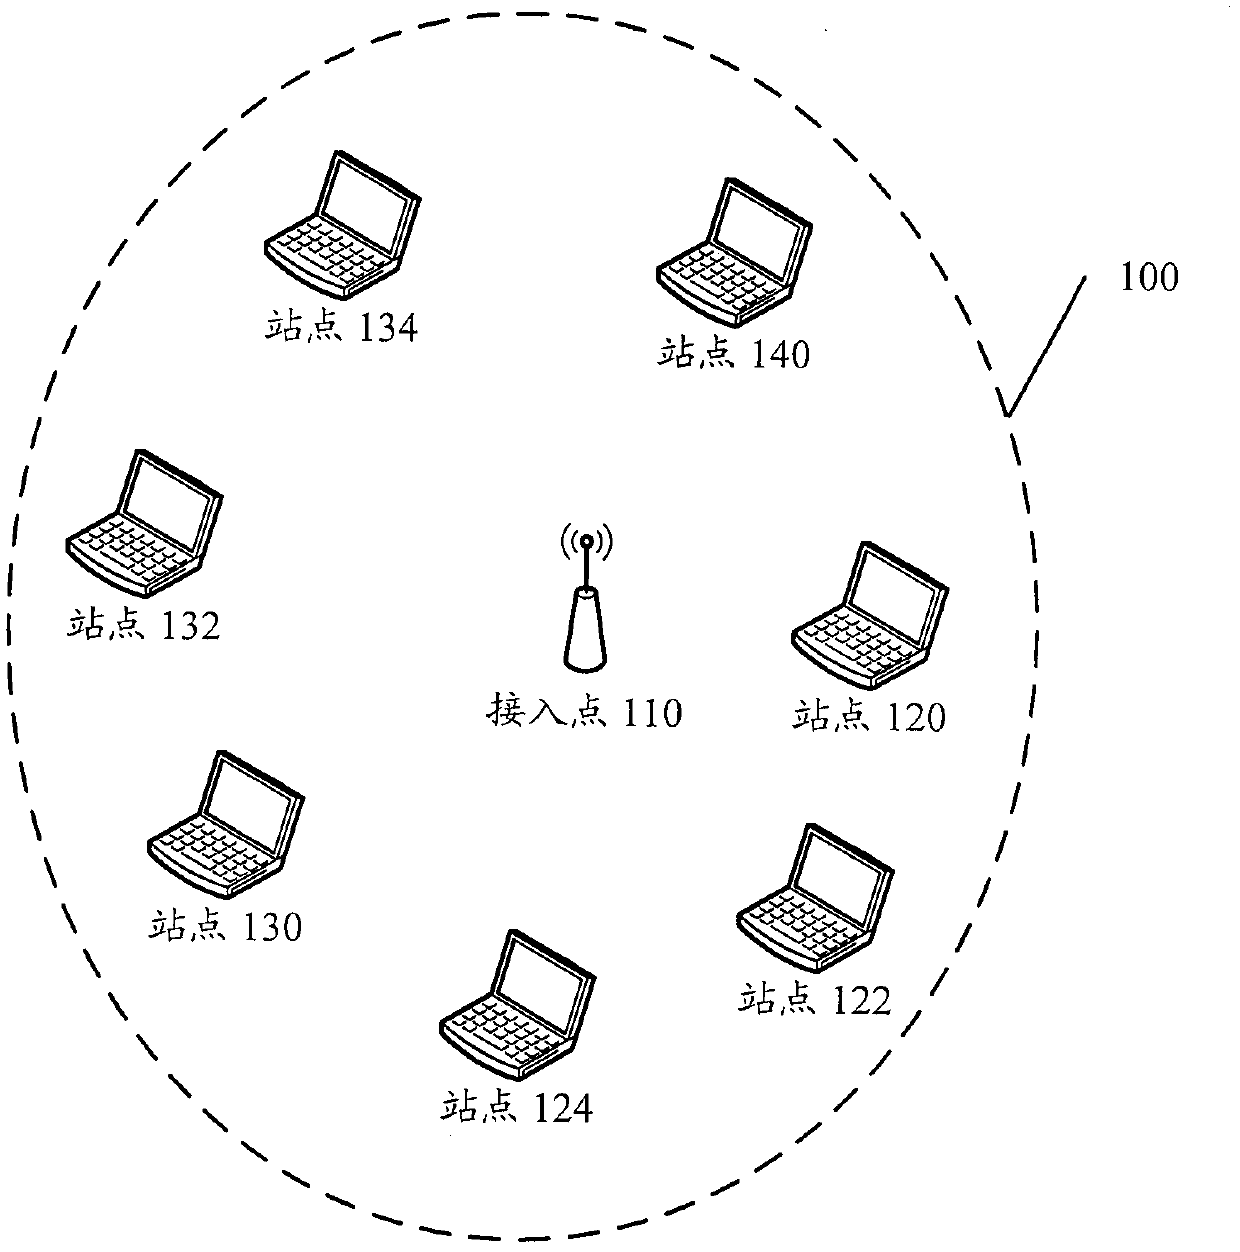 Method for radio resource scheduling in wireless local area network